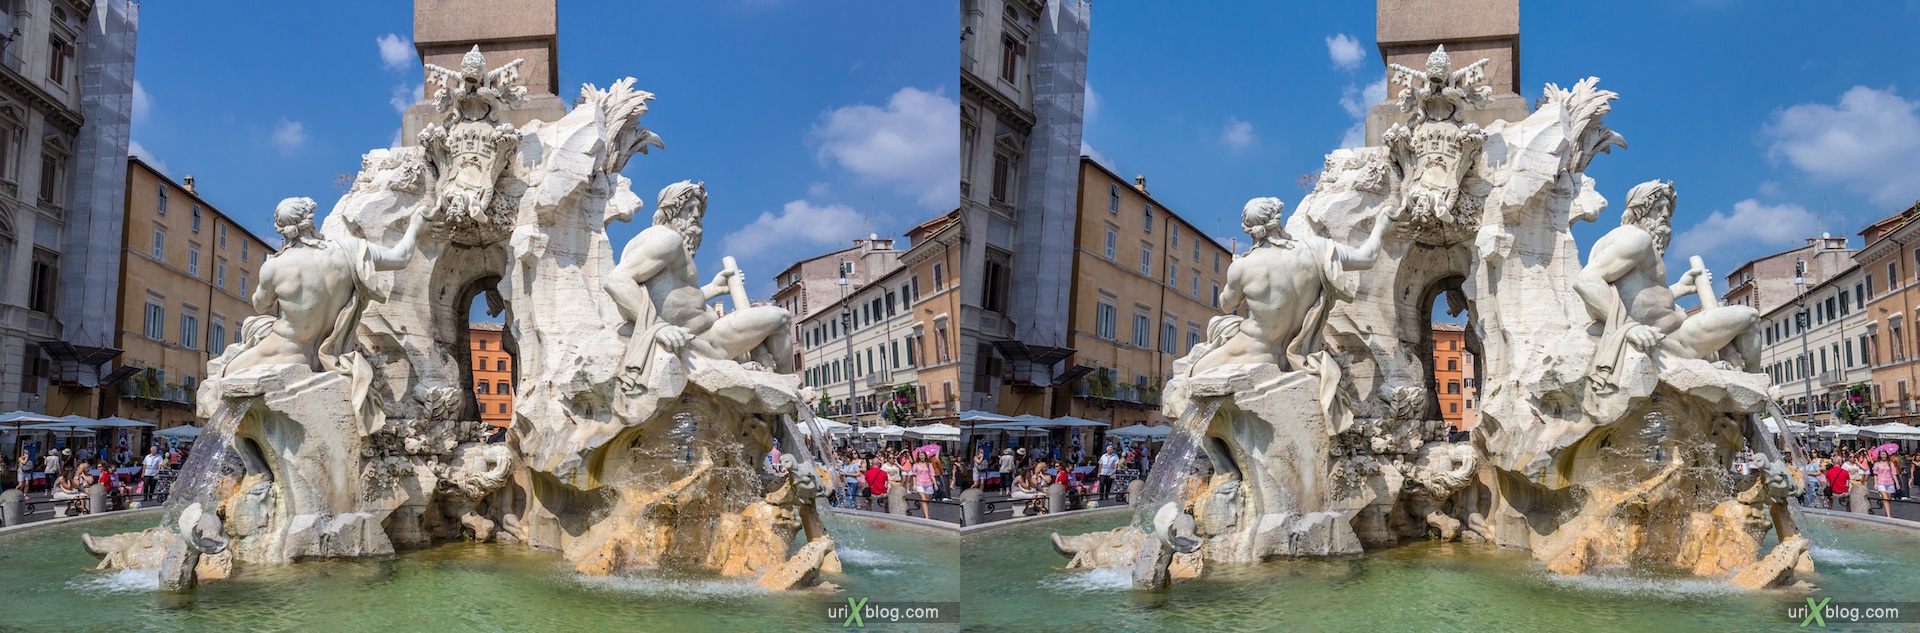 2012, fountain of the Four Rivers, Piazza Navona, Rome, Italy, 3D, stereo pair, cross-eyed, crossview, cross view stereo pair